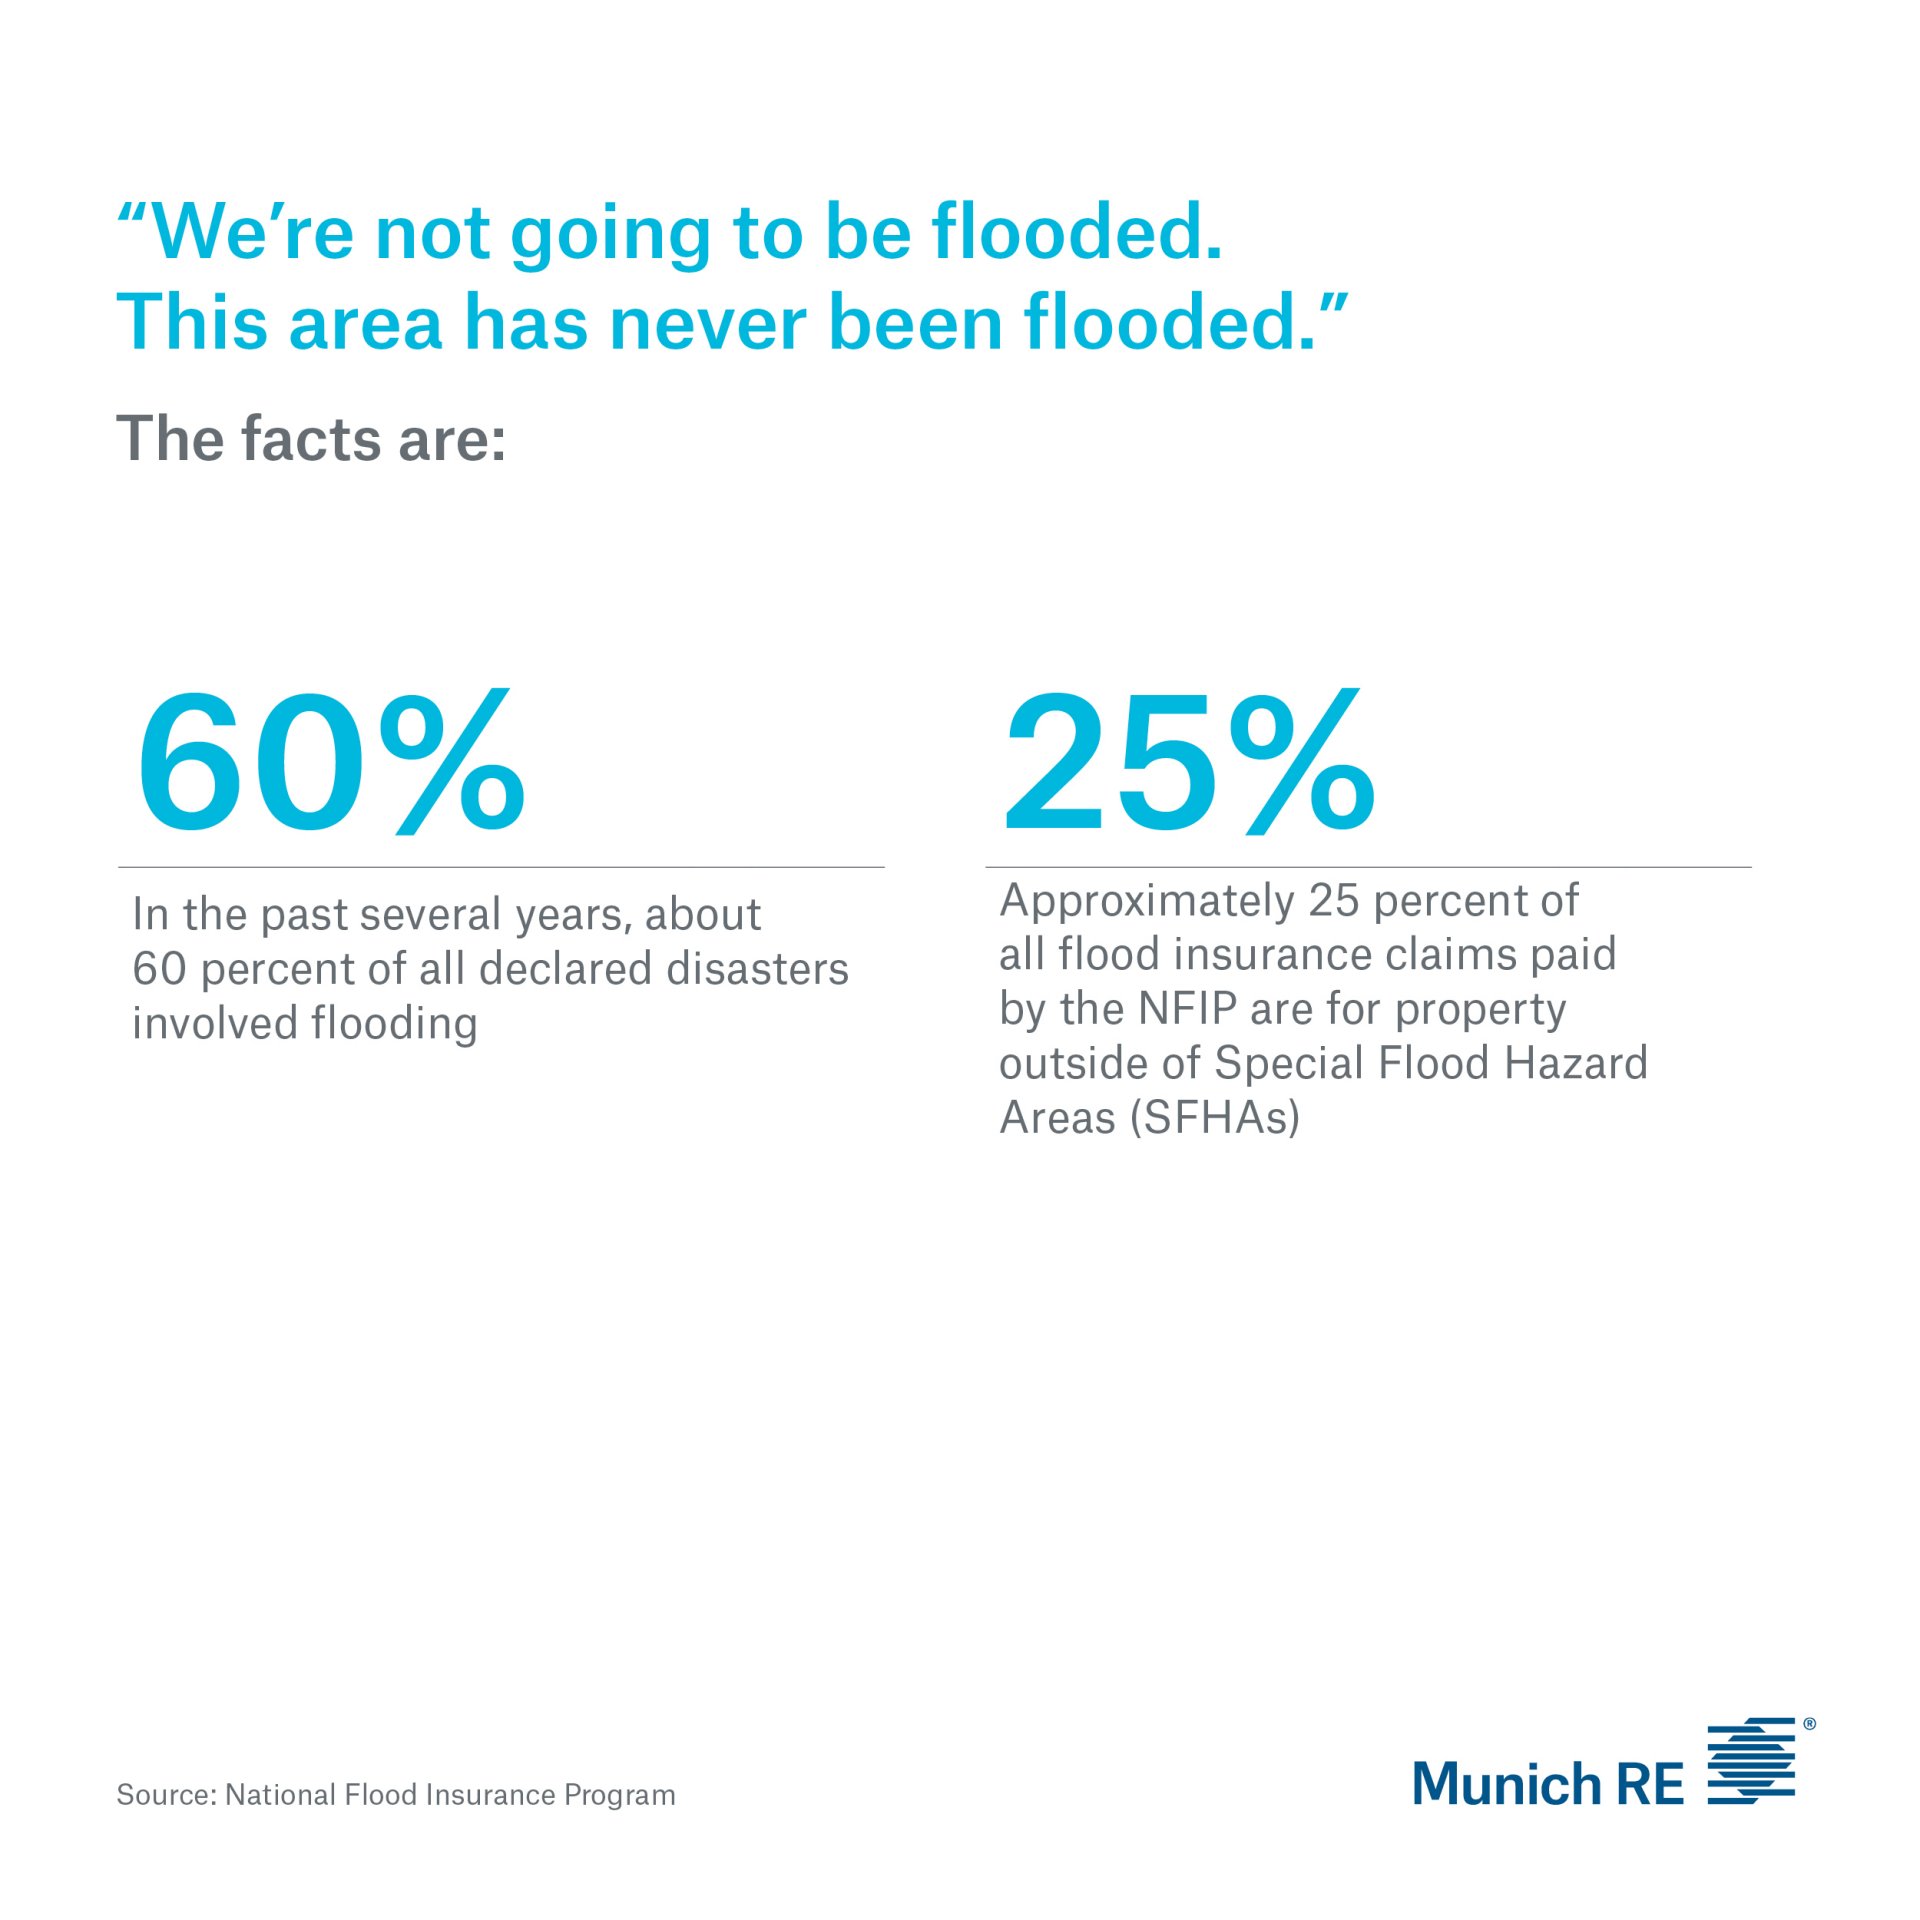 INFOGRAPHIC - In the past several years, about 60 percent of all declared disasters included flooding. Approximately 25 percent of all flood insurance claims paid by the NFIP are for property outside of Special Flood Hazard Areas (SFHAs)